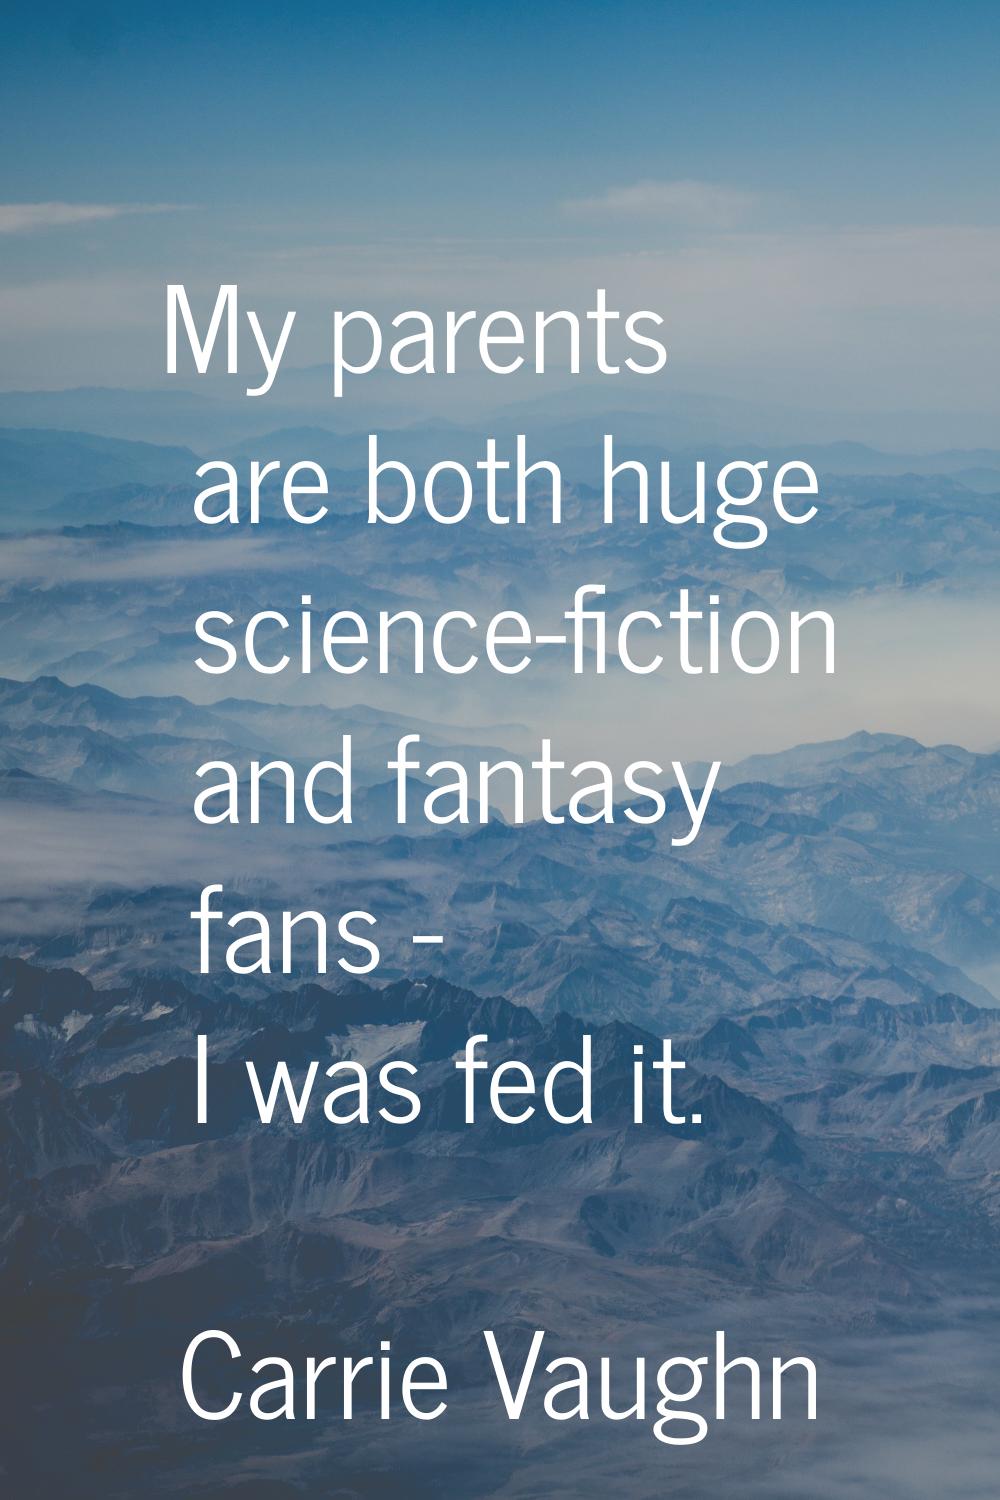 My parents are both huge science-fiction and fantasy fans - I was fed it.